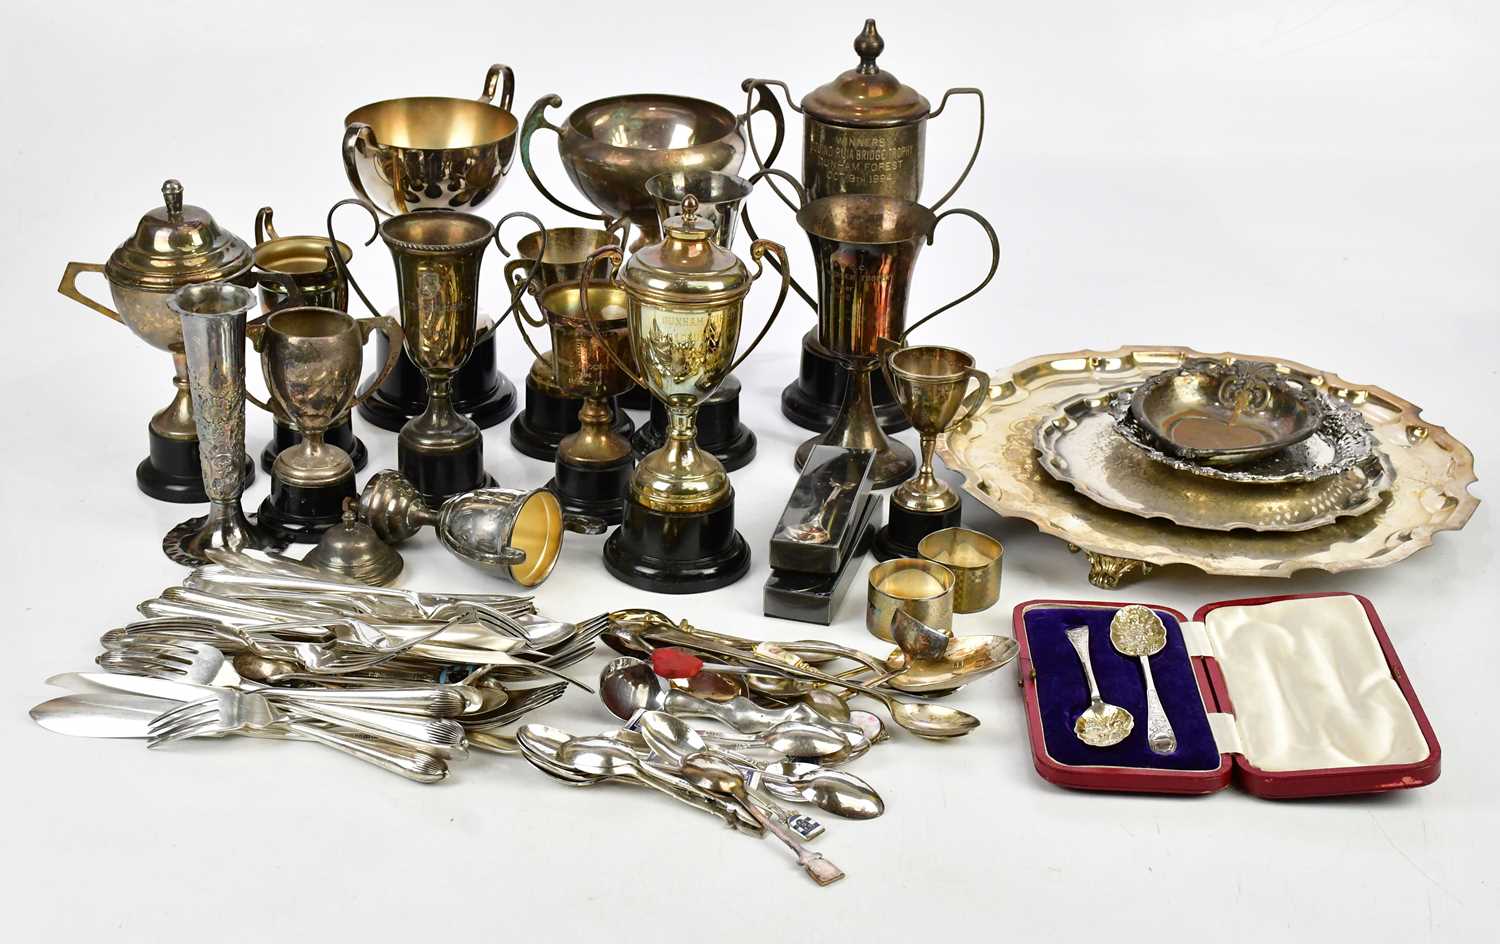 A collection of assorted silver plated items, including trophy cups, flatware, etc.